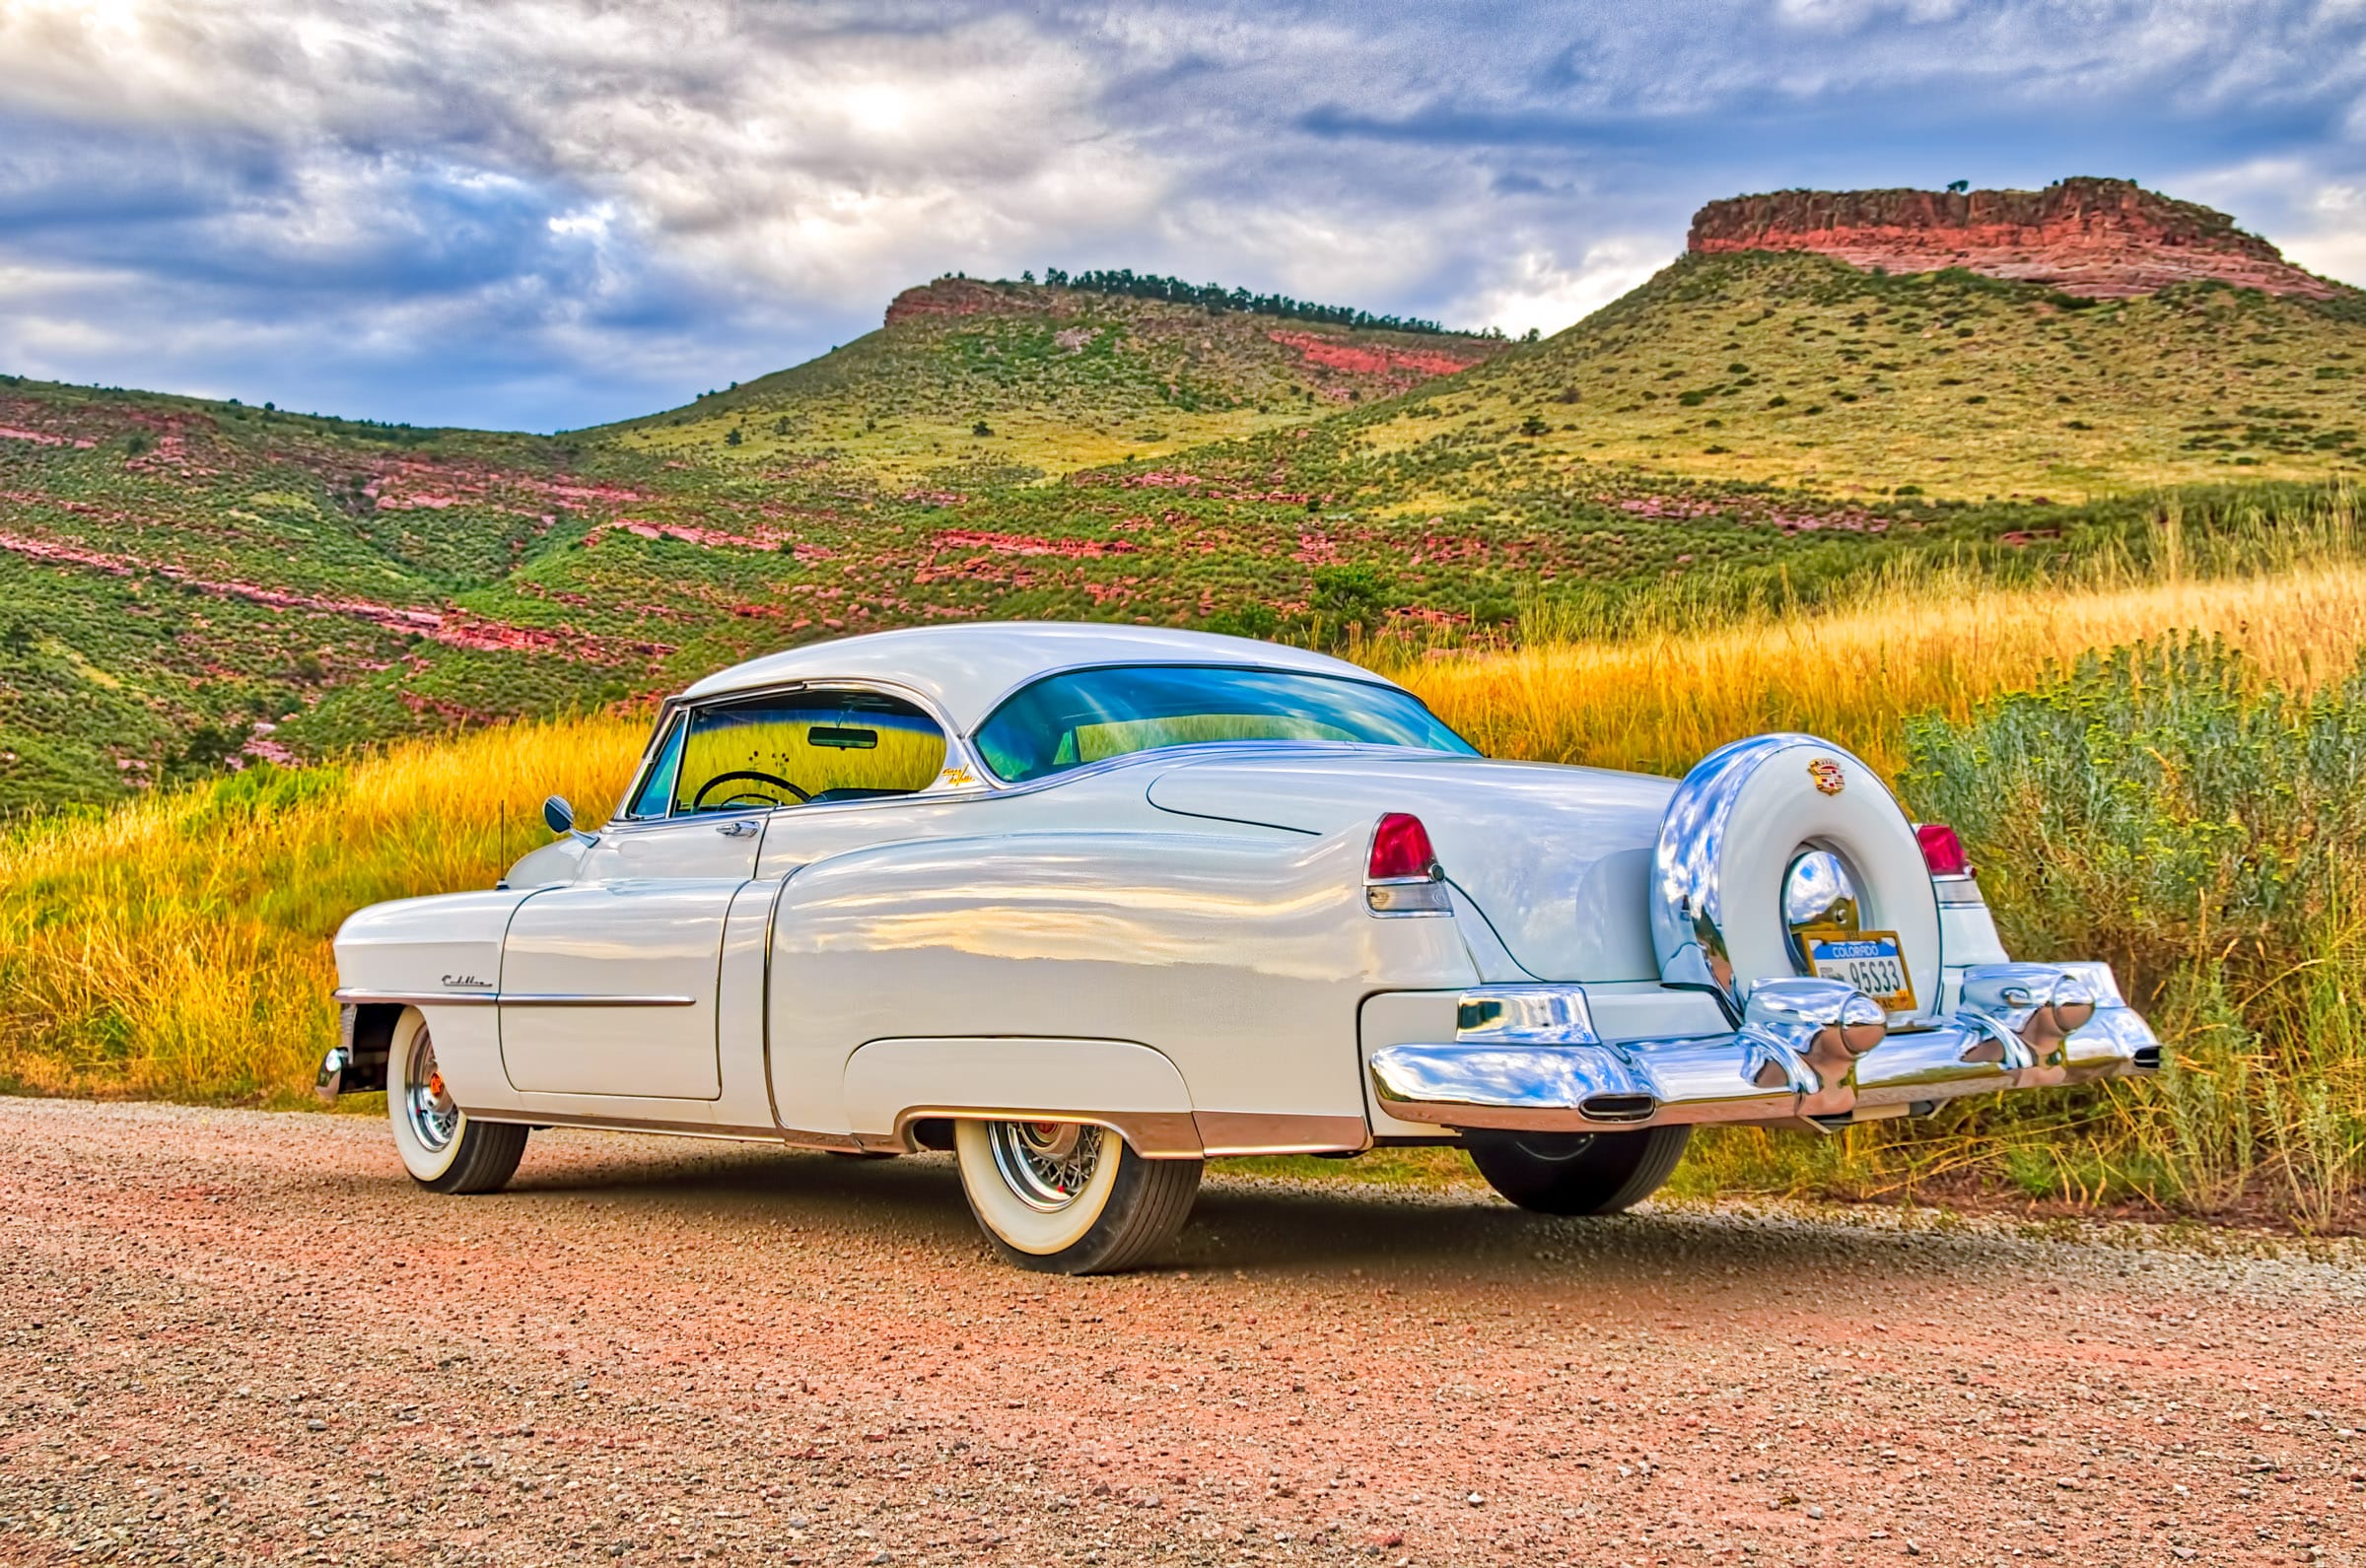 1953 Cadillac Coupe deVille -Left rear three-quarter view with red buttes and clouds.